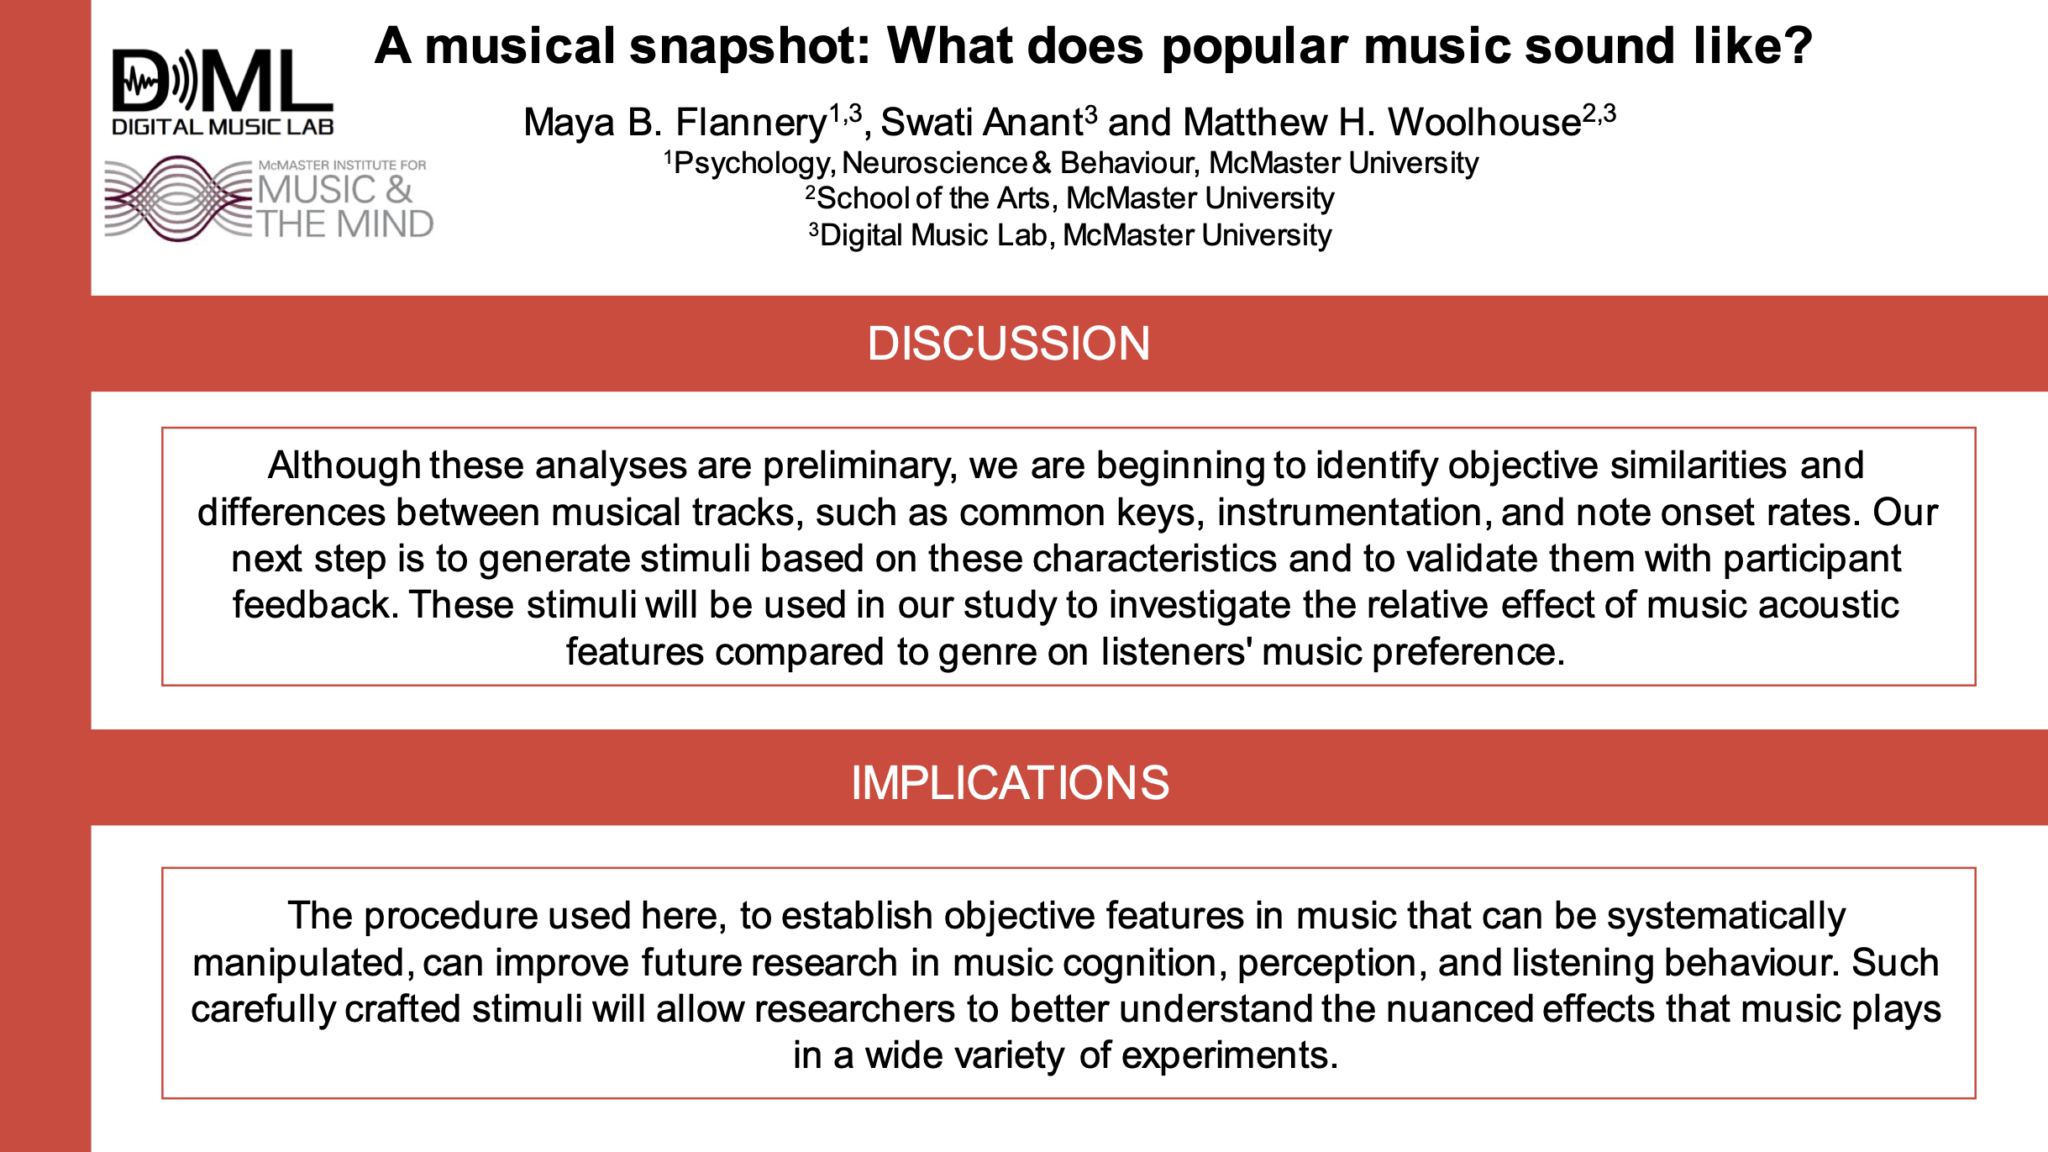 Part of the digital poster for "A musical snapshot: What does popular music sound like?" by Maya B. Flannery, Swati Anant, and Matthew H. Woolhouse. This slide goes over the discussion and implications of the research.